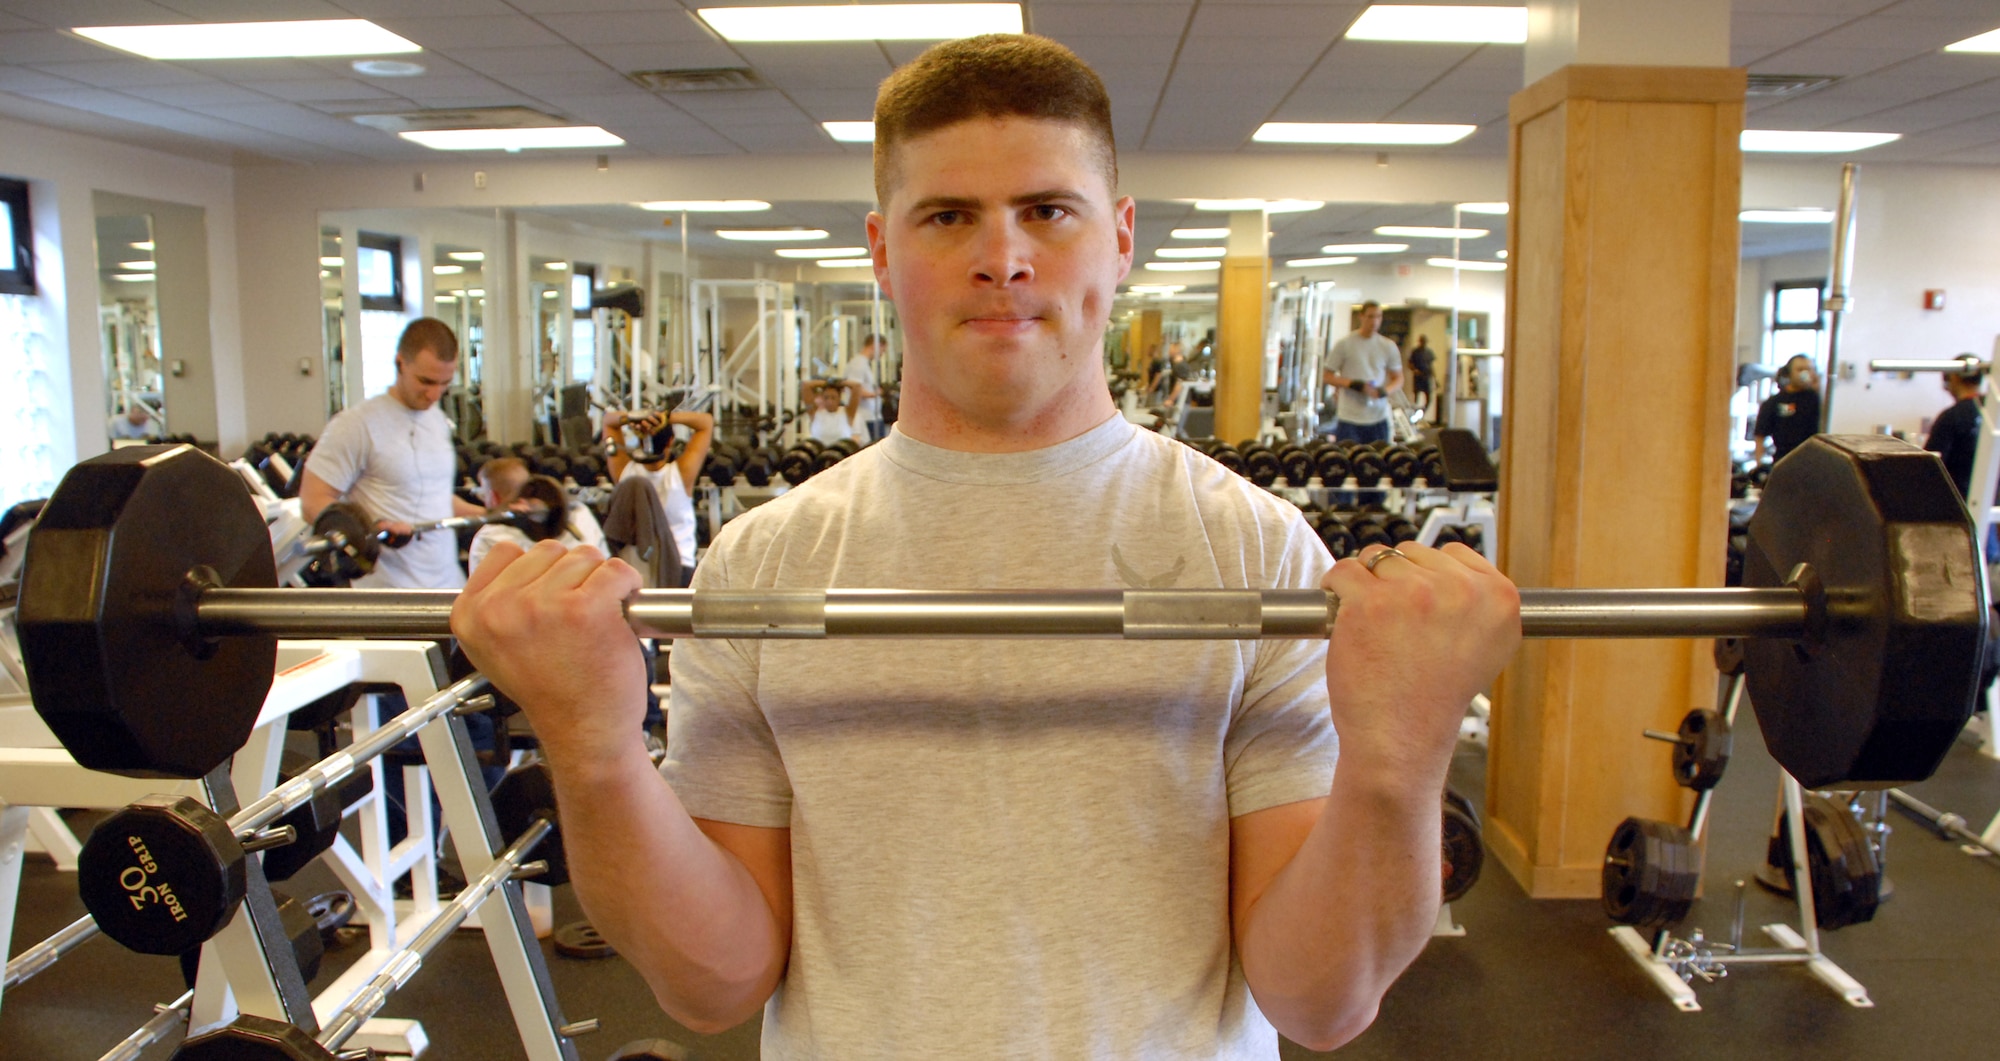 Staff Sgt. Michael Gump, 436th Force Support Squadron, does arm curls at the Fitness Center. Sergeant Gump was on the team that took first place in the Biggest Winner Competition by losing 126.6 pounds. (U.S. Air Force photo/ Airman 1st Class Shen-Chia Chu)